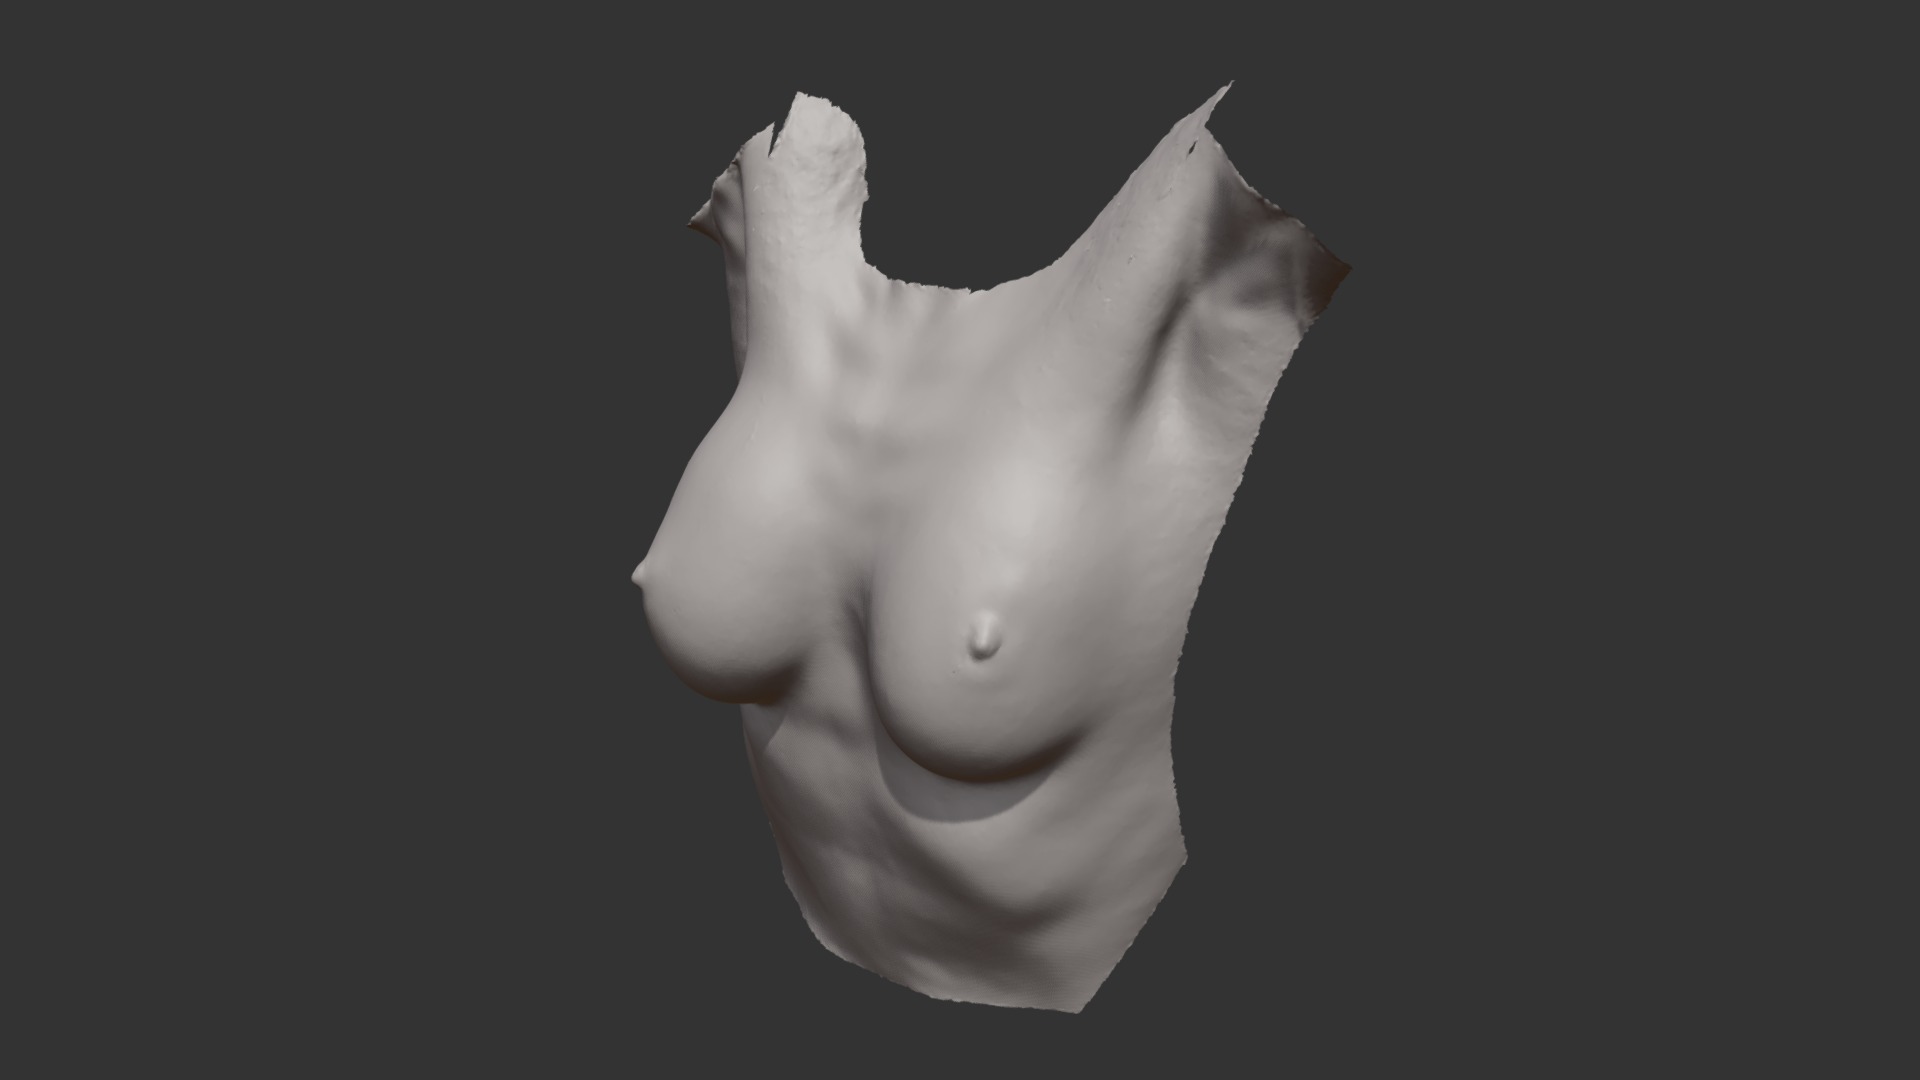 3D model Breasts - This is a 3D model of the Breasts. The 3D model is about a hand with a white glove.